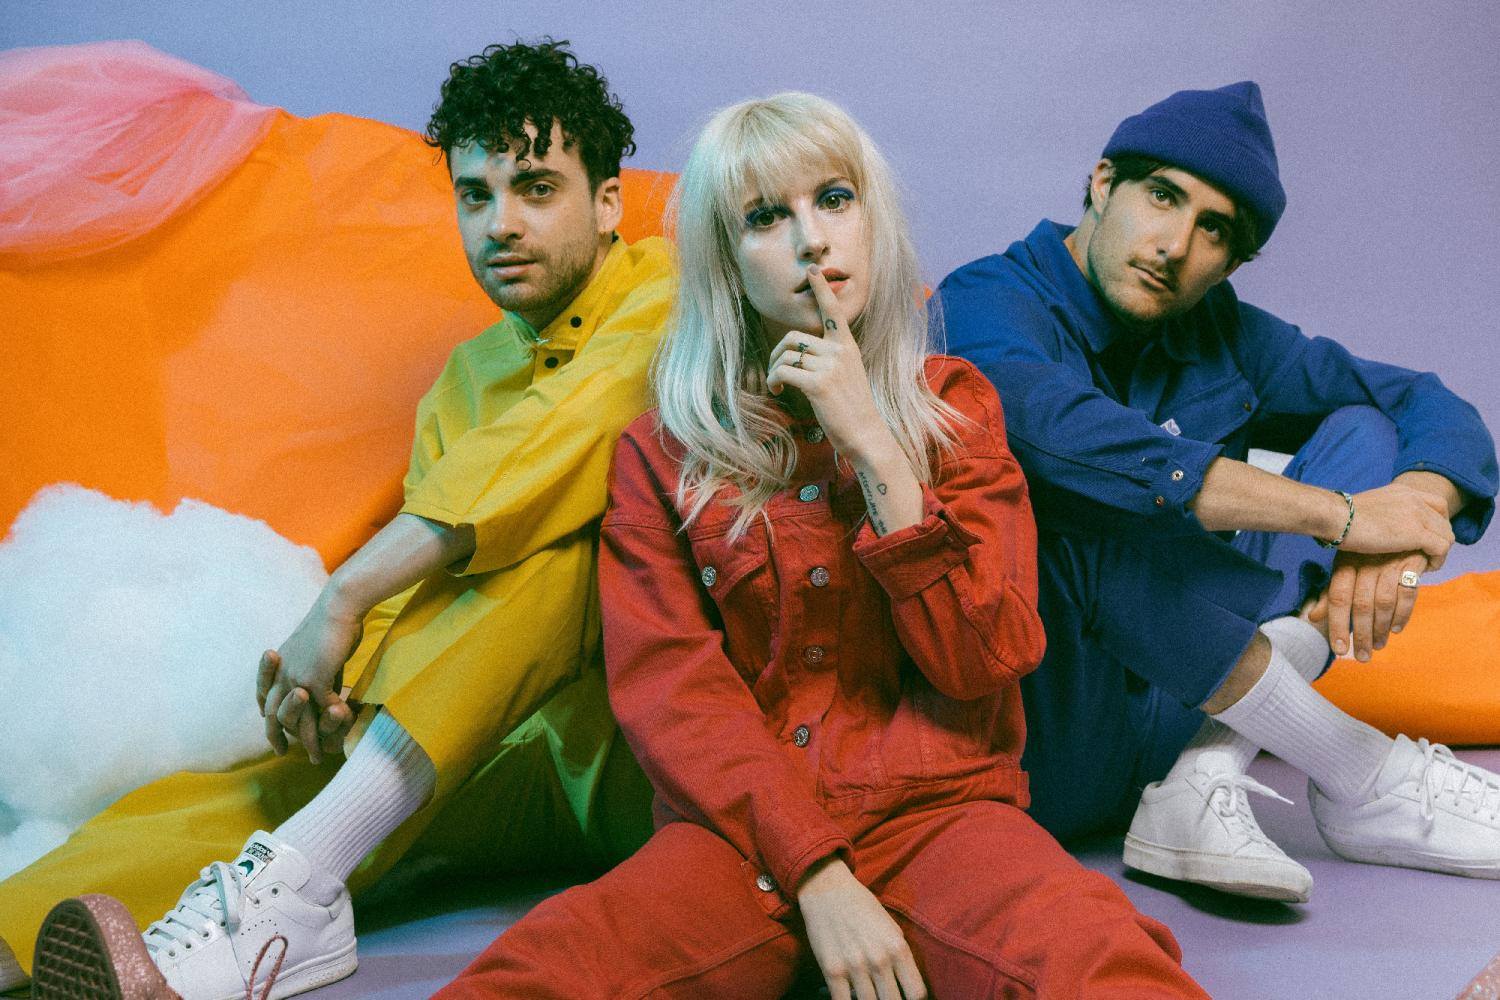 Times Hayley Williams Mentioned Mental Health in 'After Laughter'